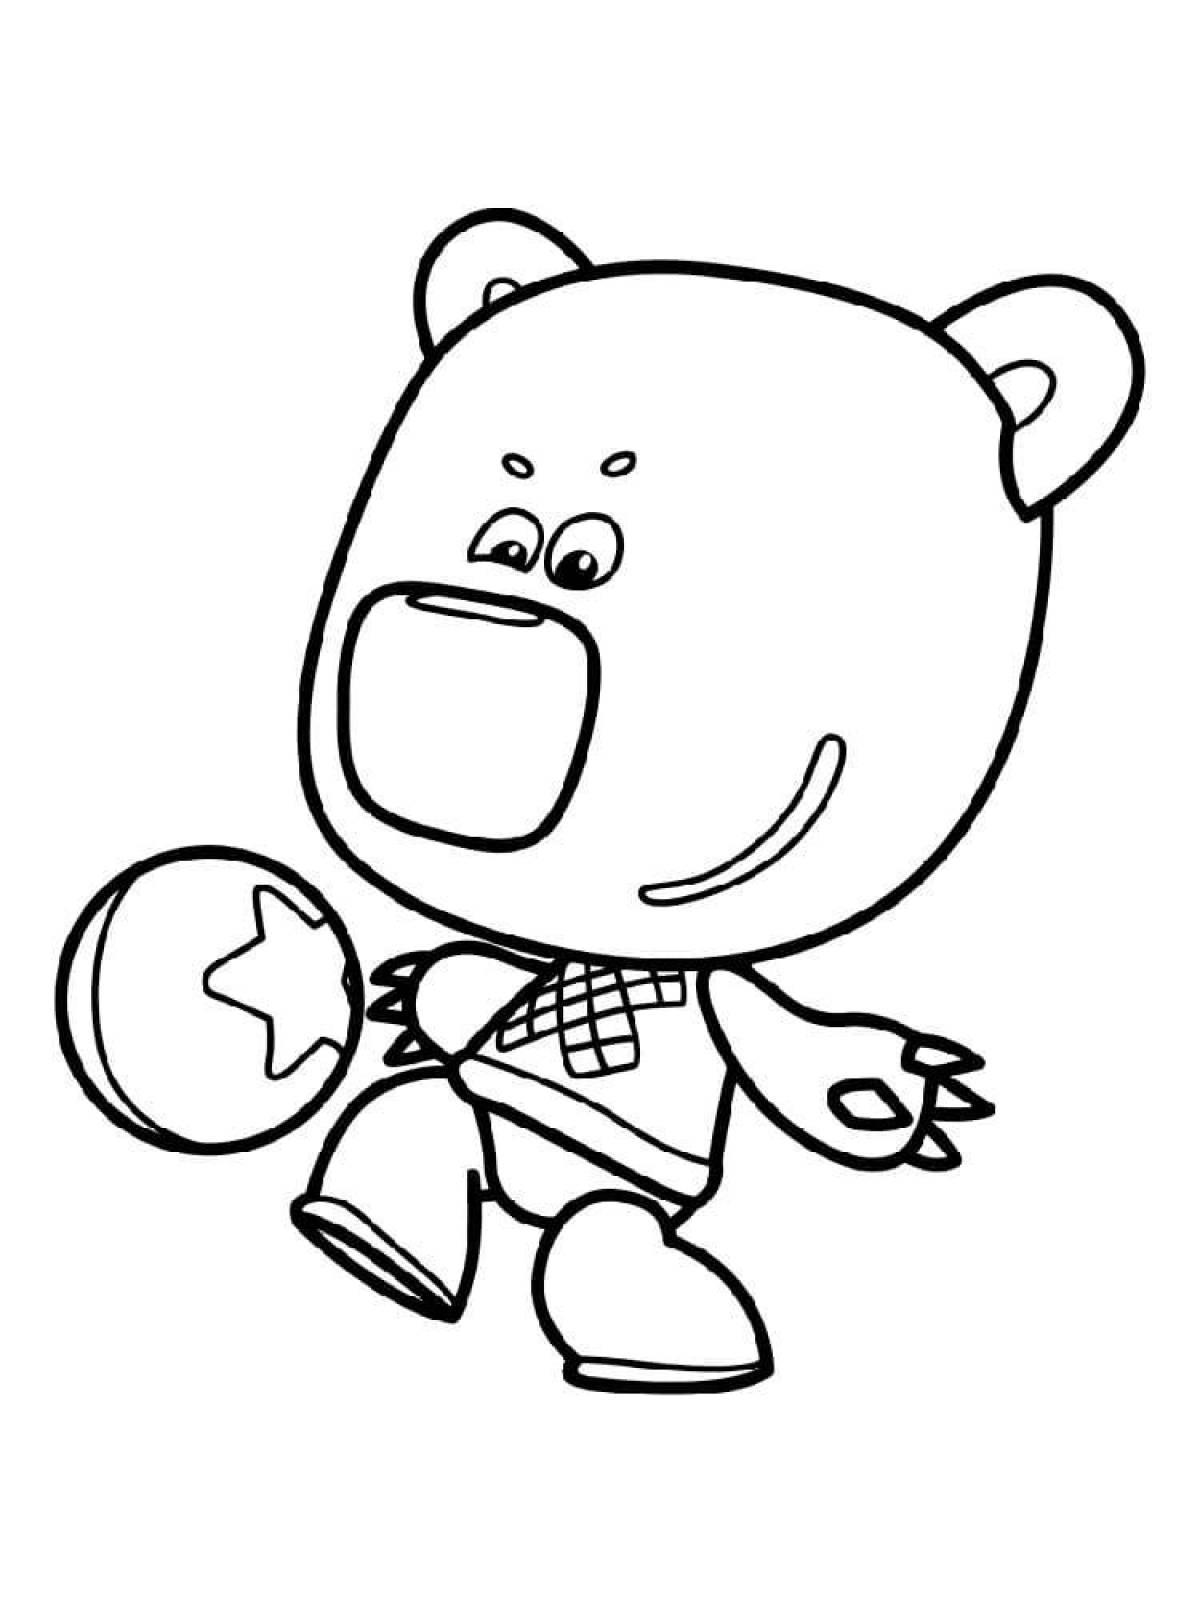 Turn on the cute bear coloring #18